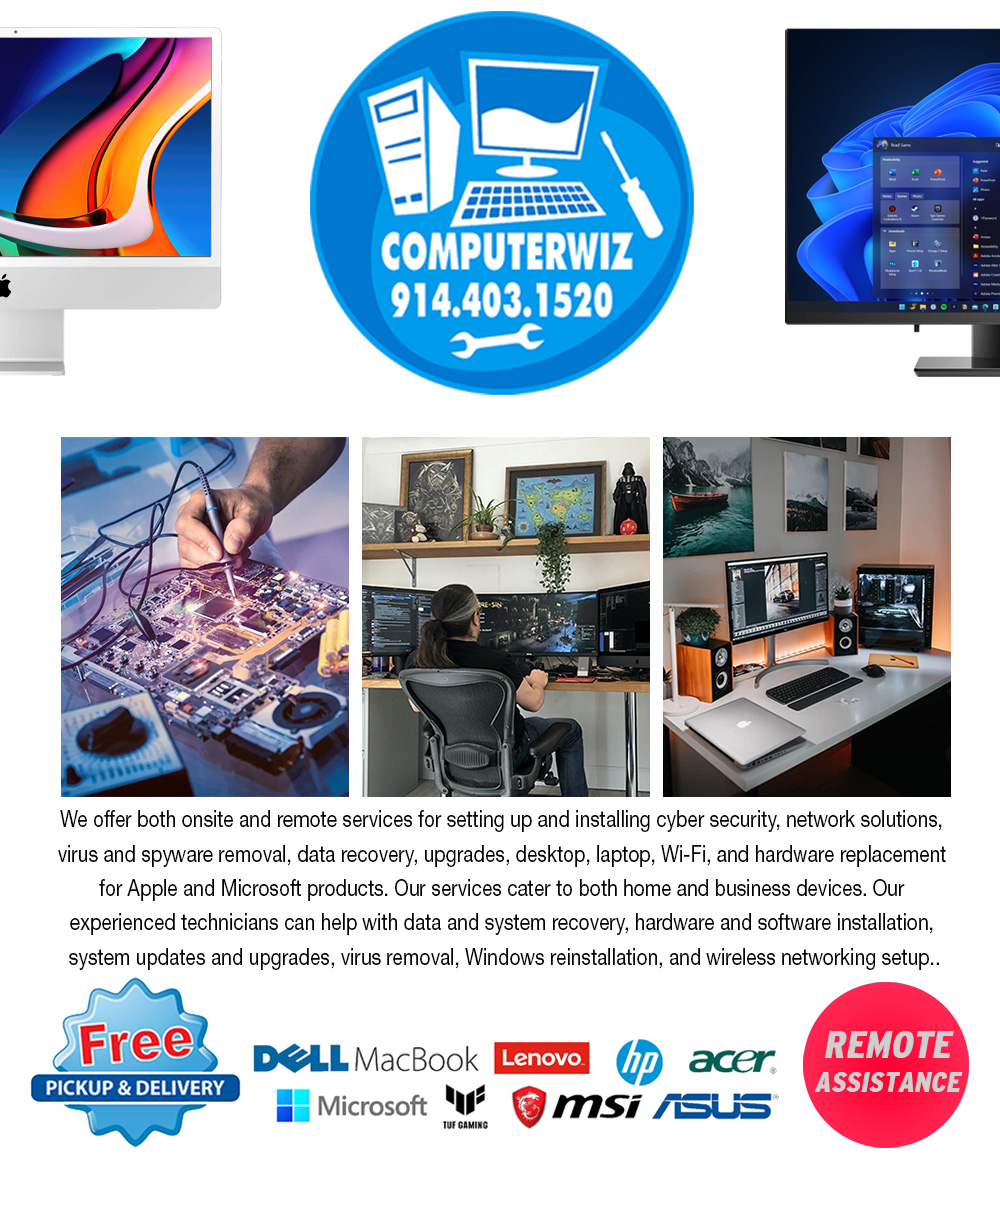 We offer both onsite and remote services for setting up and installing cyber security, network solutions, virus and spyware removal, data recovery, upgrades, desktop, laptop, Wi-Fi, and hardware replacement for Apple and Microsoft products. Our services cater to both home and business devices. Our experienced technicians can help with data and system recovery, hardware and software installation, system updates and upgrades, virus removal, Windows reinstallation, and wireless networking setup…